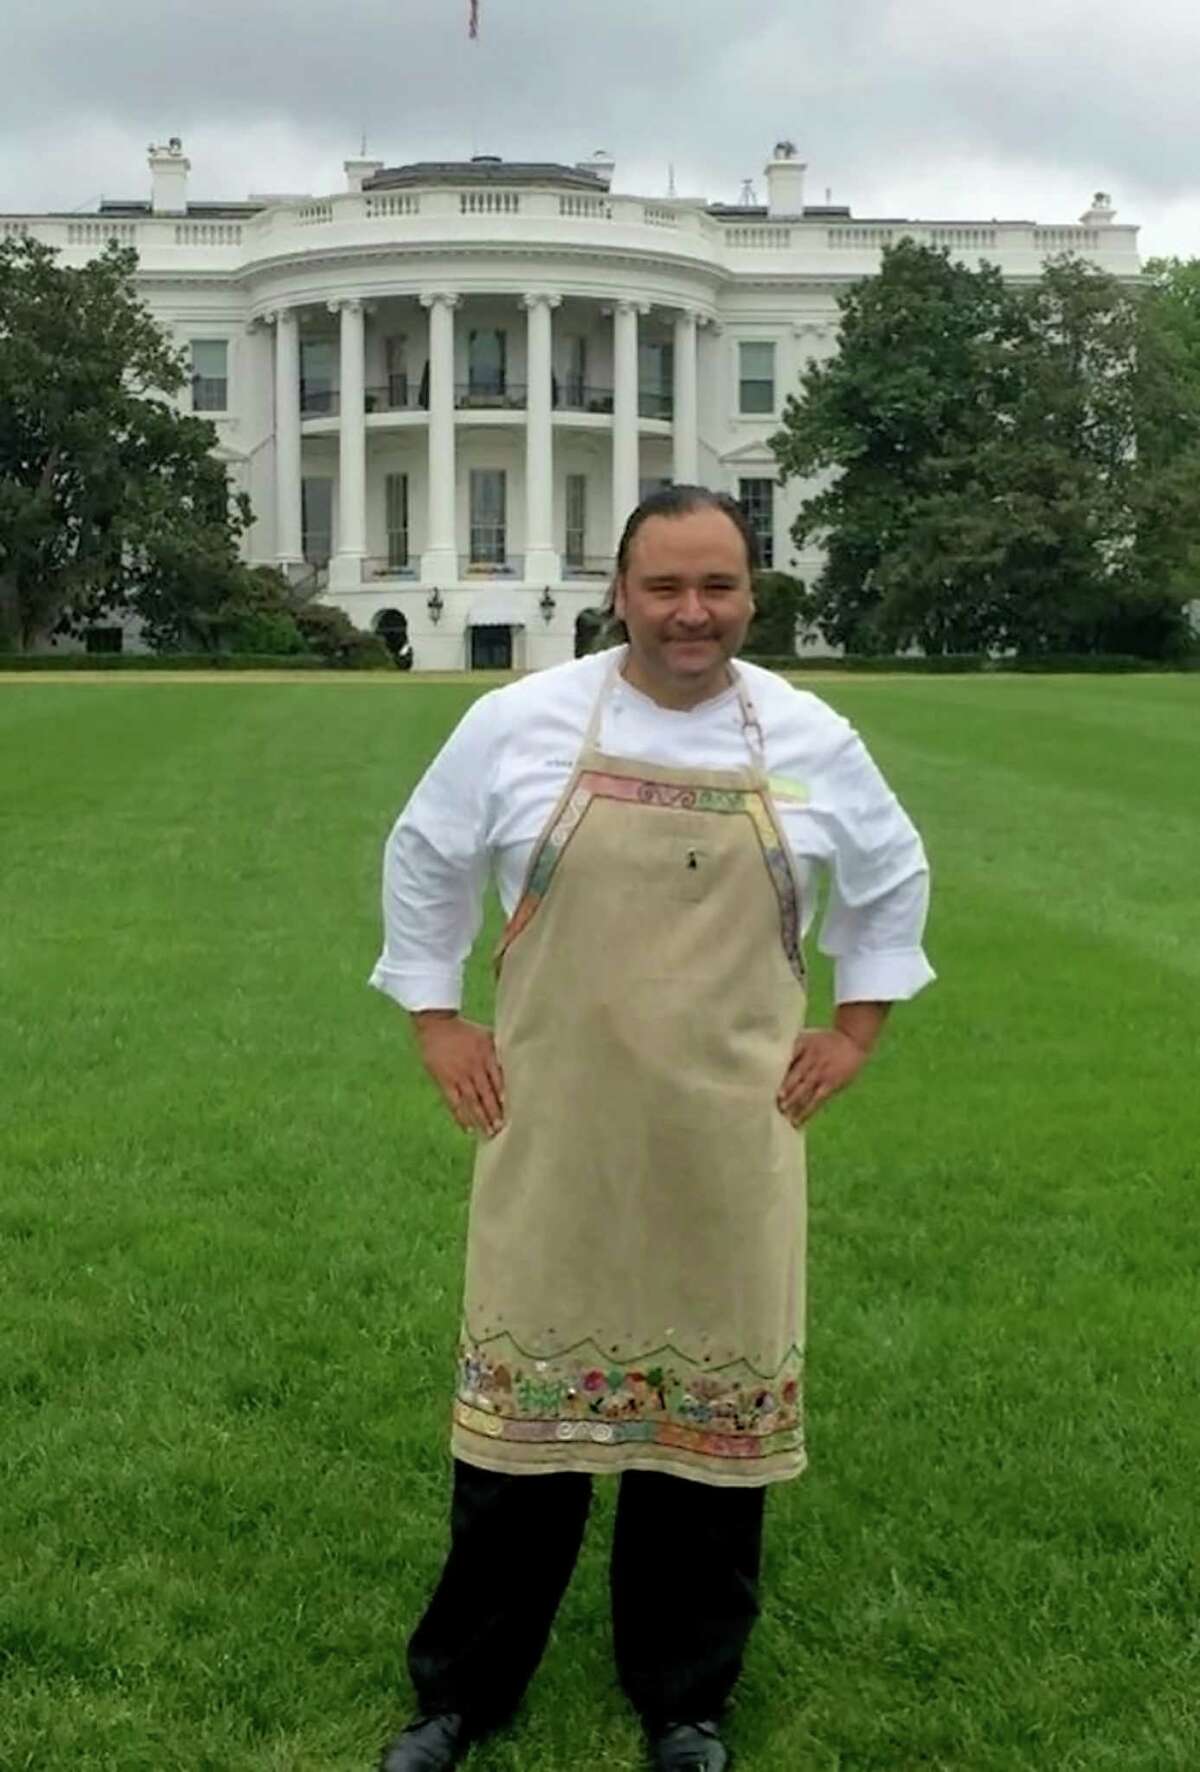 San Antonio chef Johnny Hernandez poses in front of the Whitehouse on Thursday, May 5, 2016. Hernandez created a Cinco de Mayo feast for the President and staff.